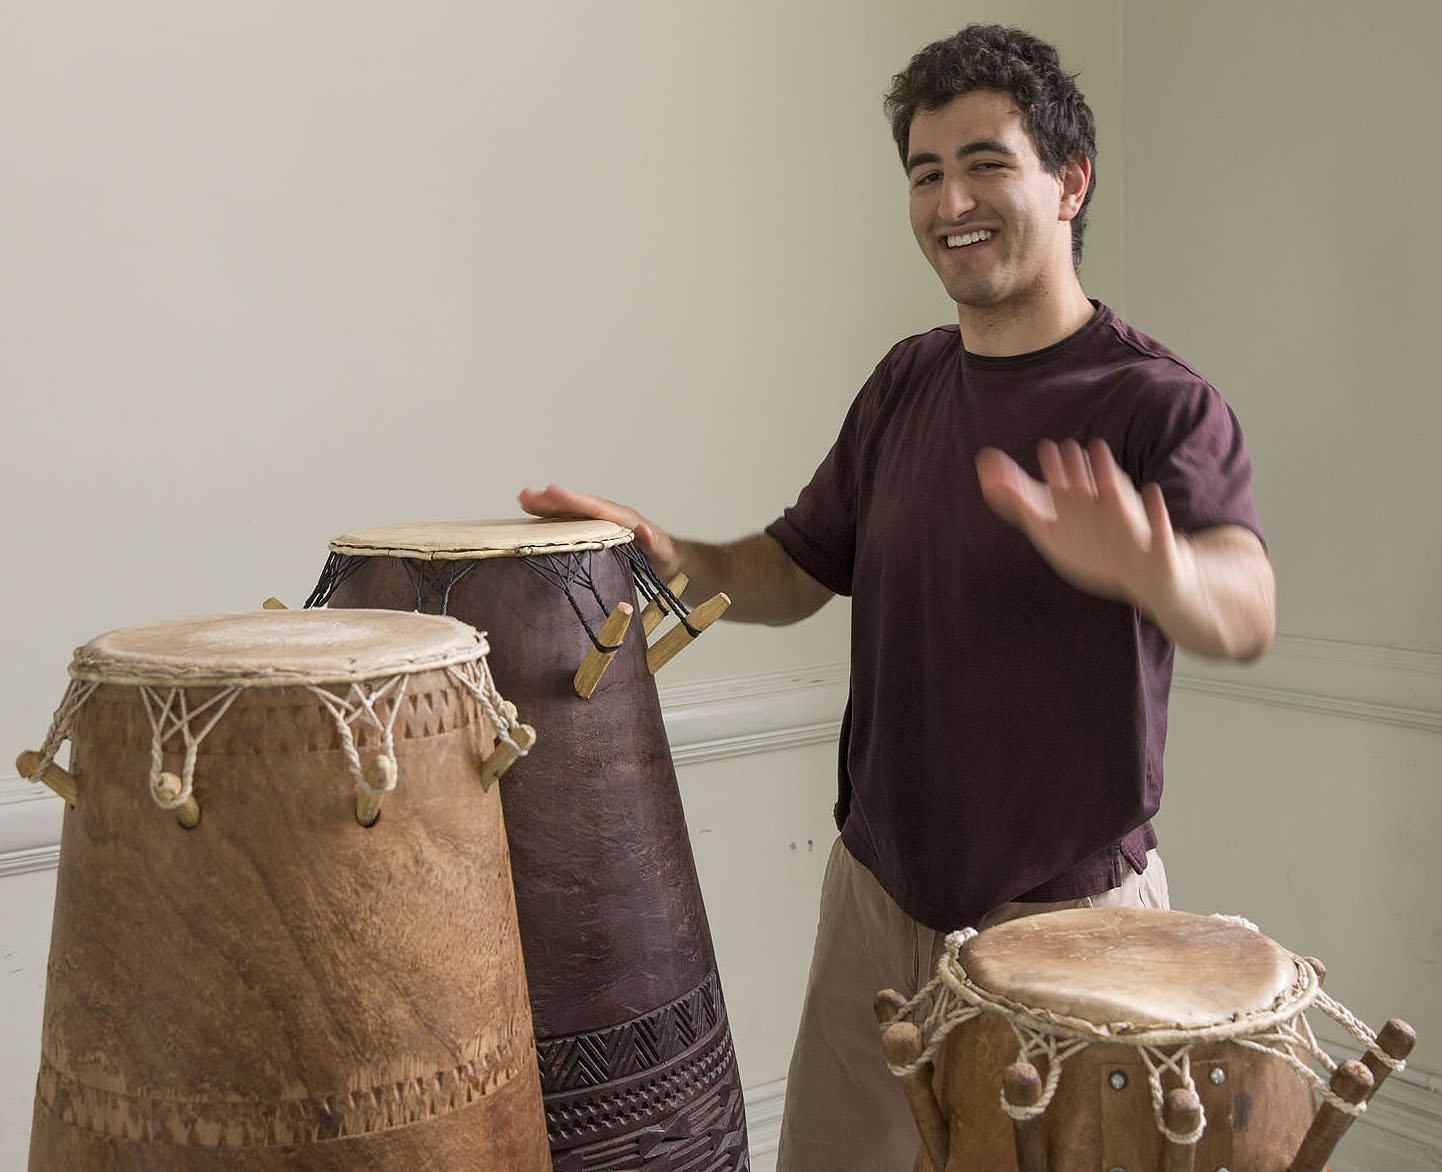 Alan Brody playing African drums while smiling at the camera